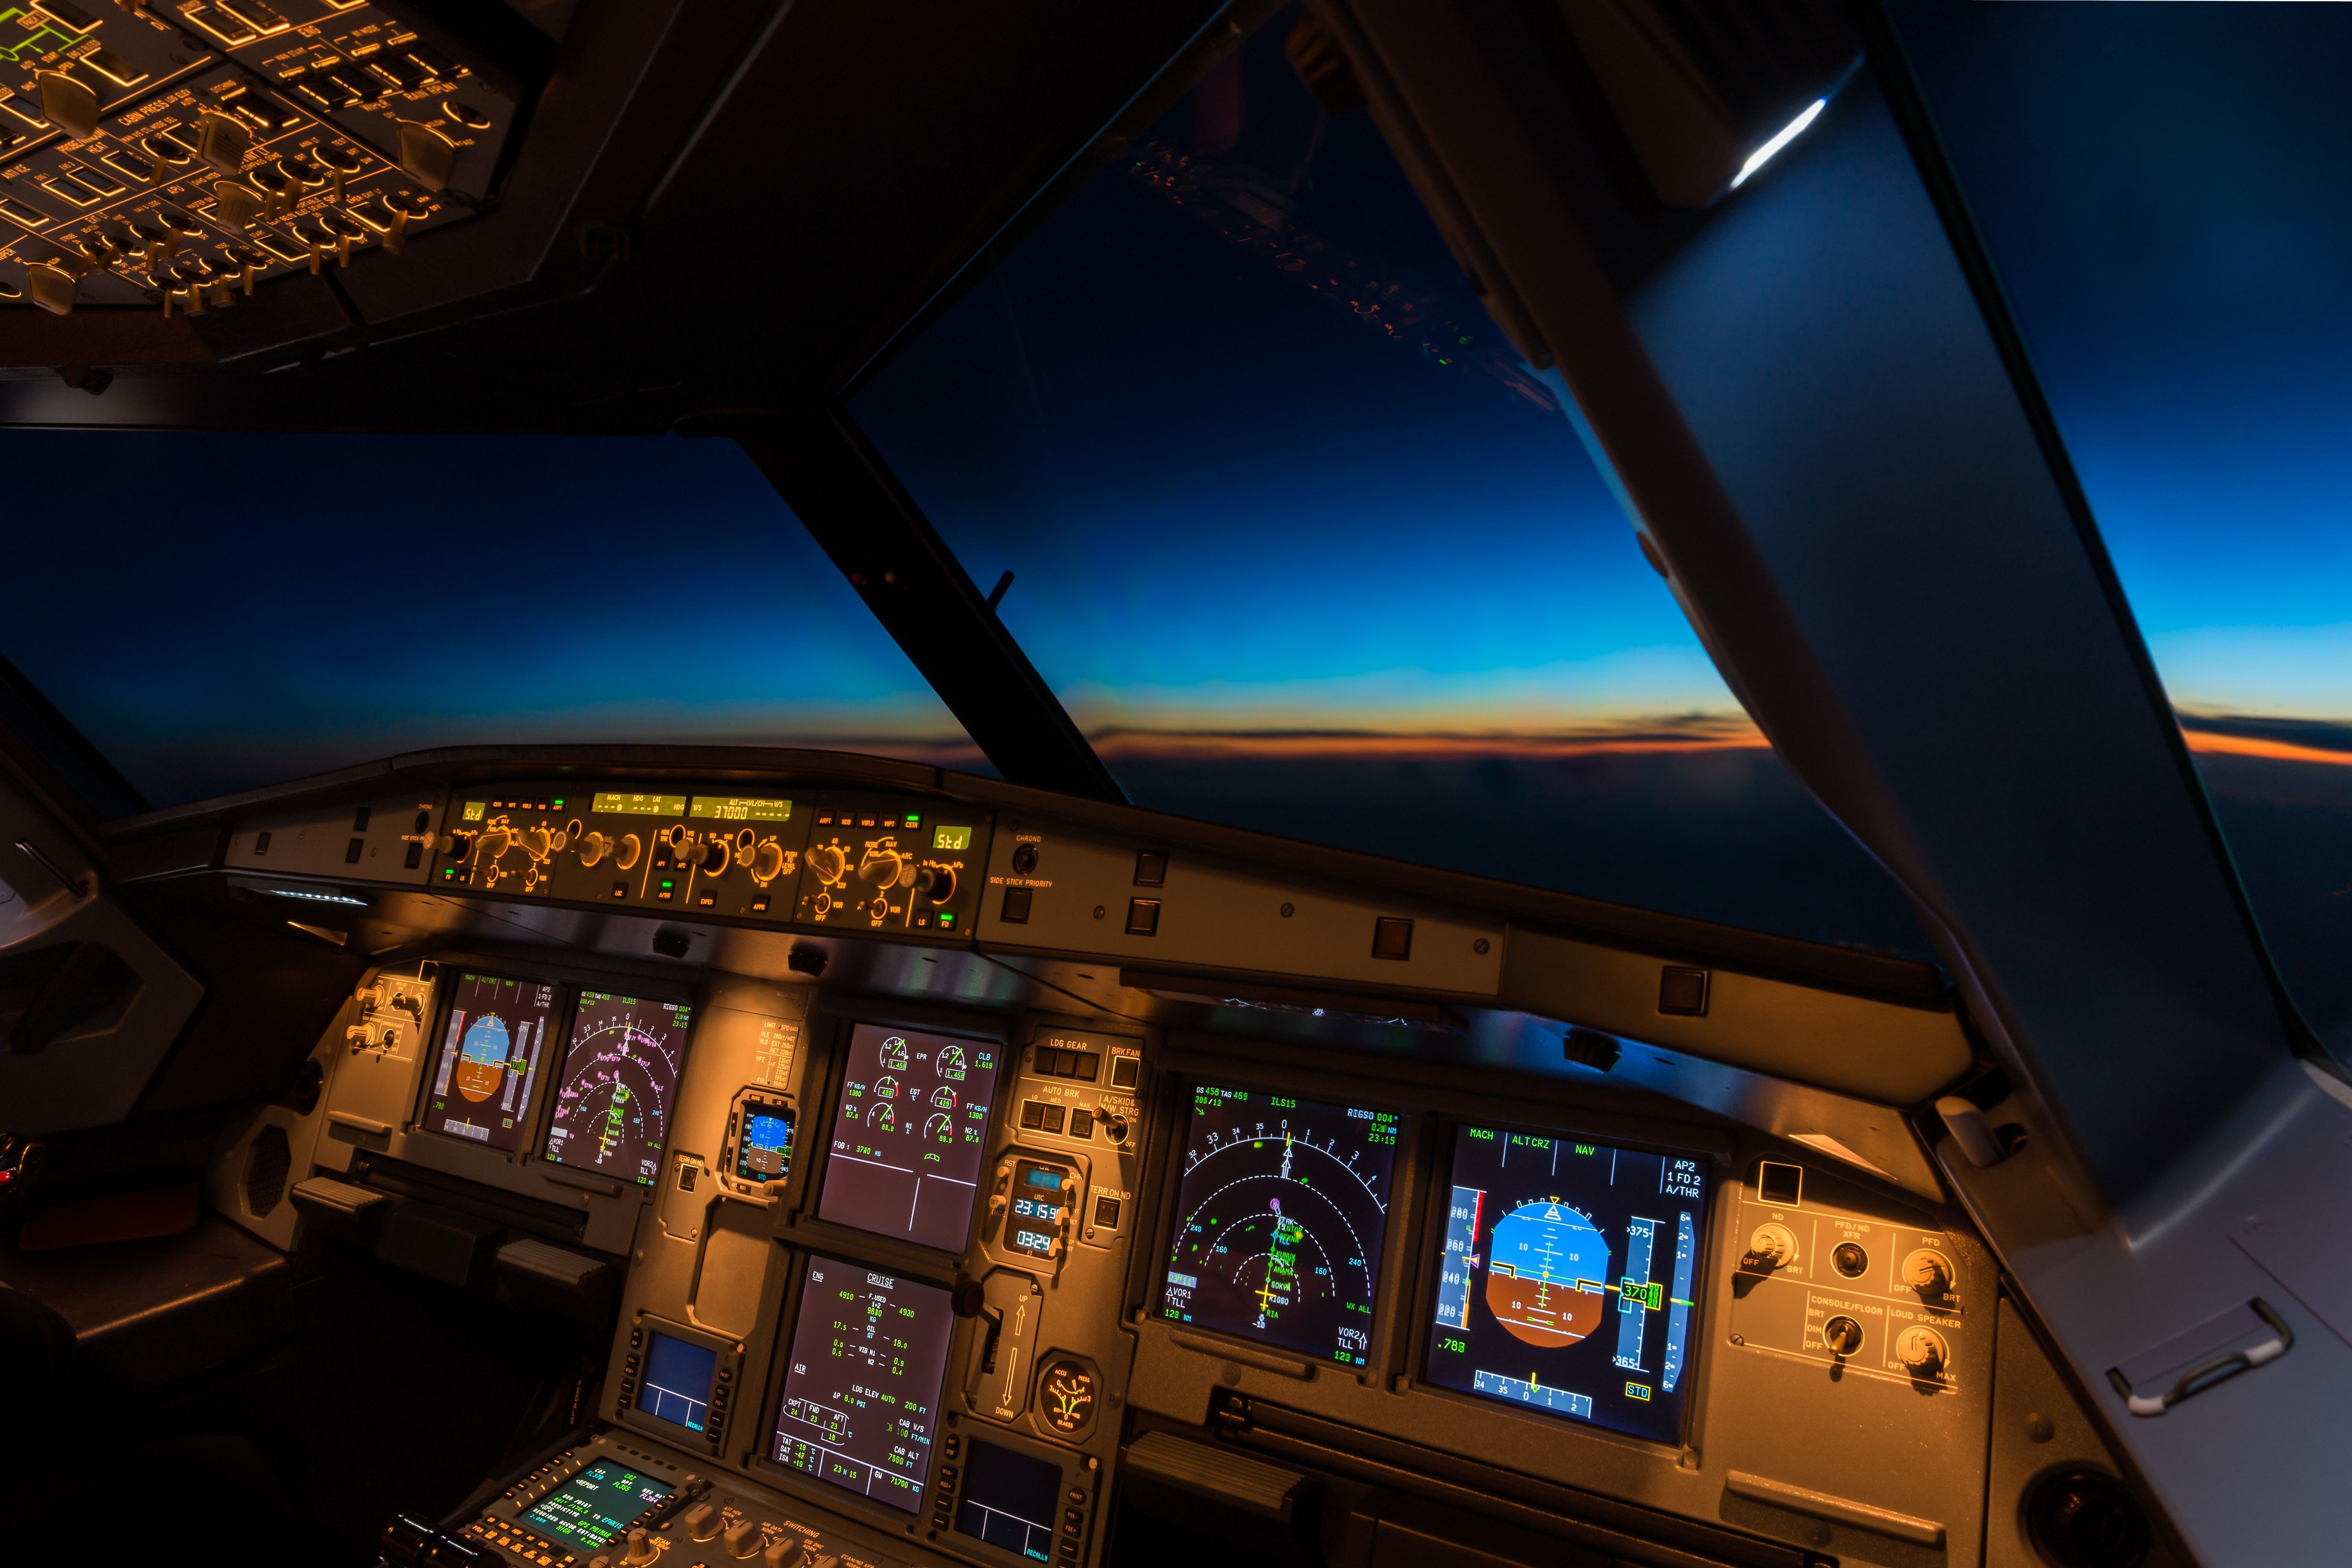 The view from inside an Airbus cockpit in cruise.